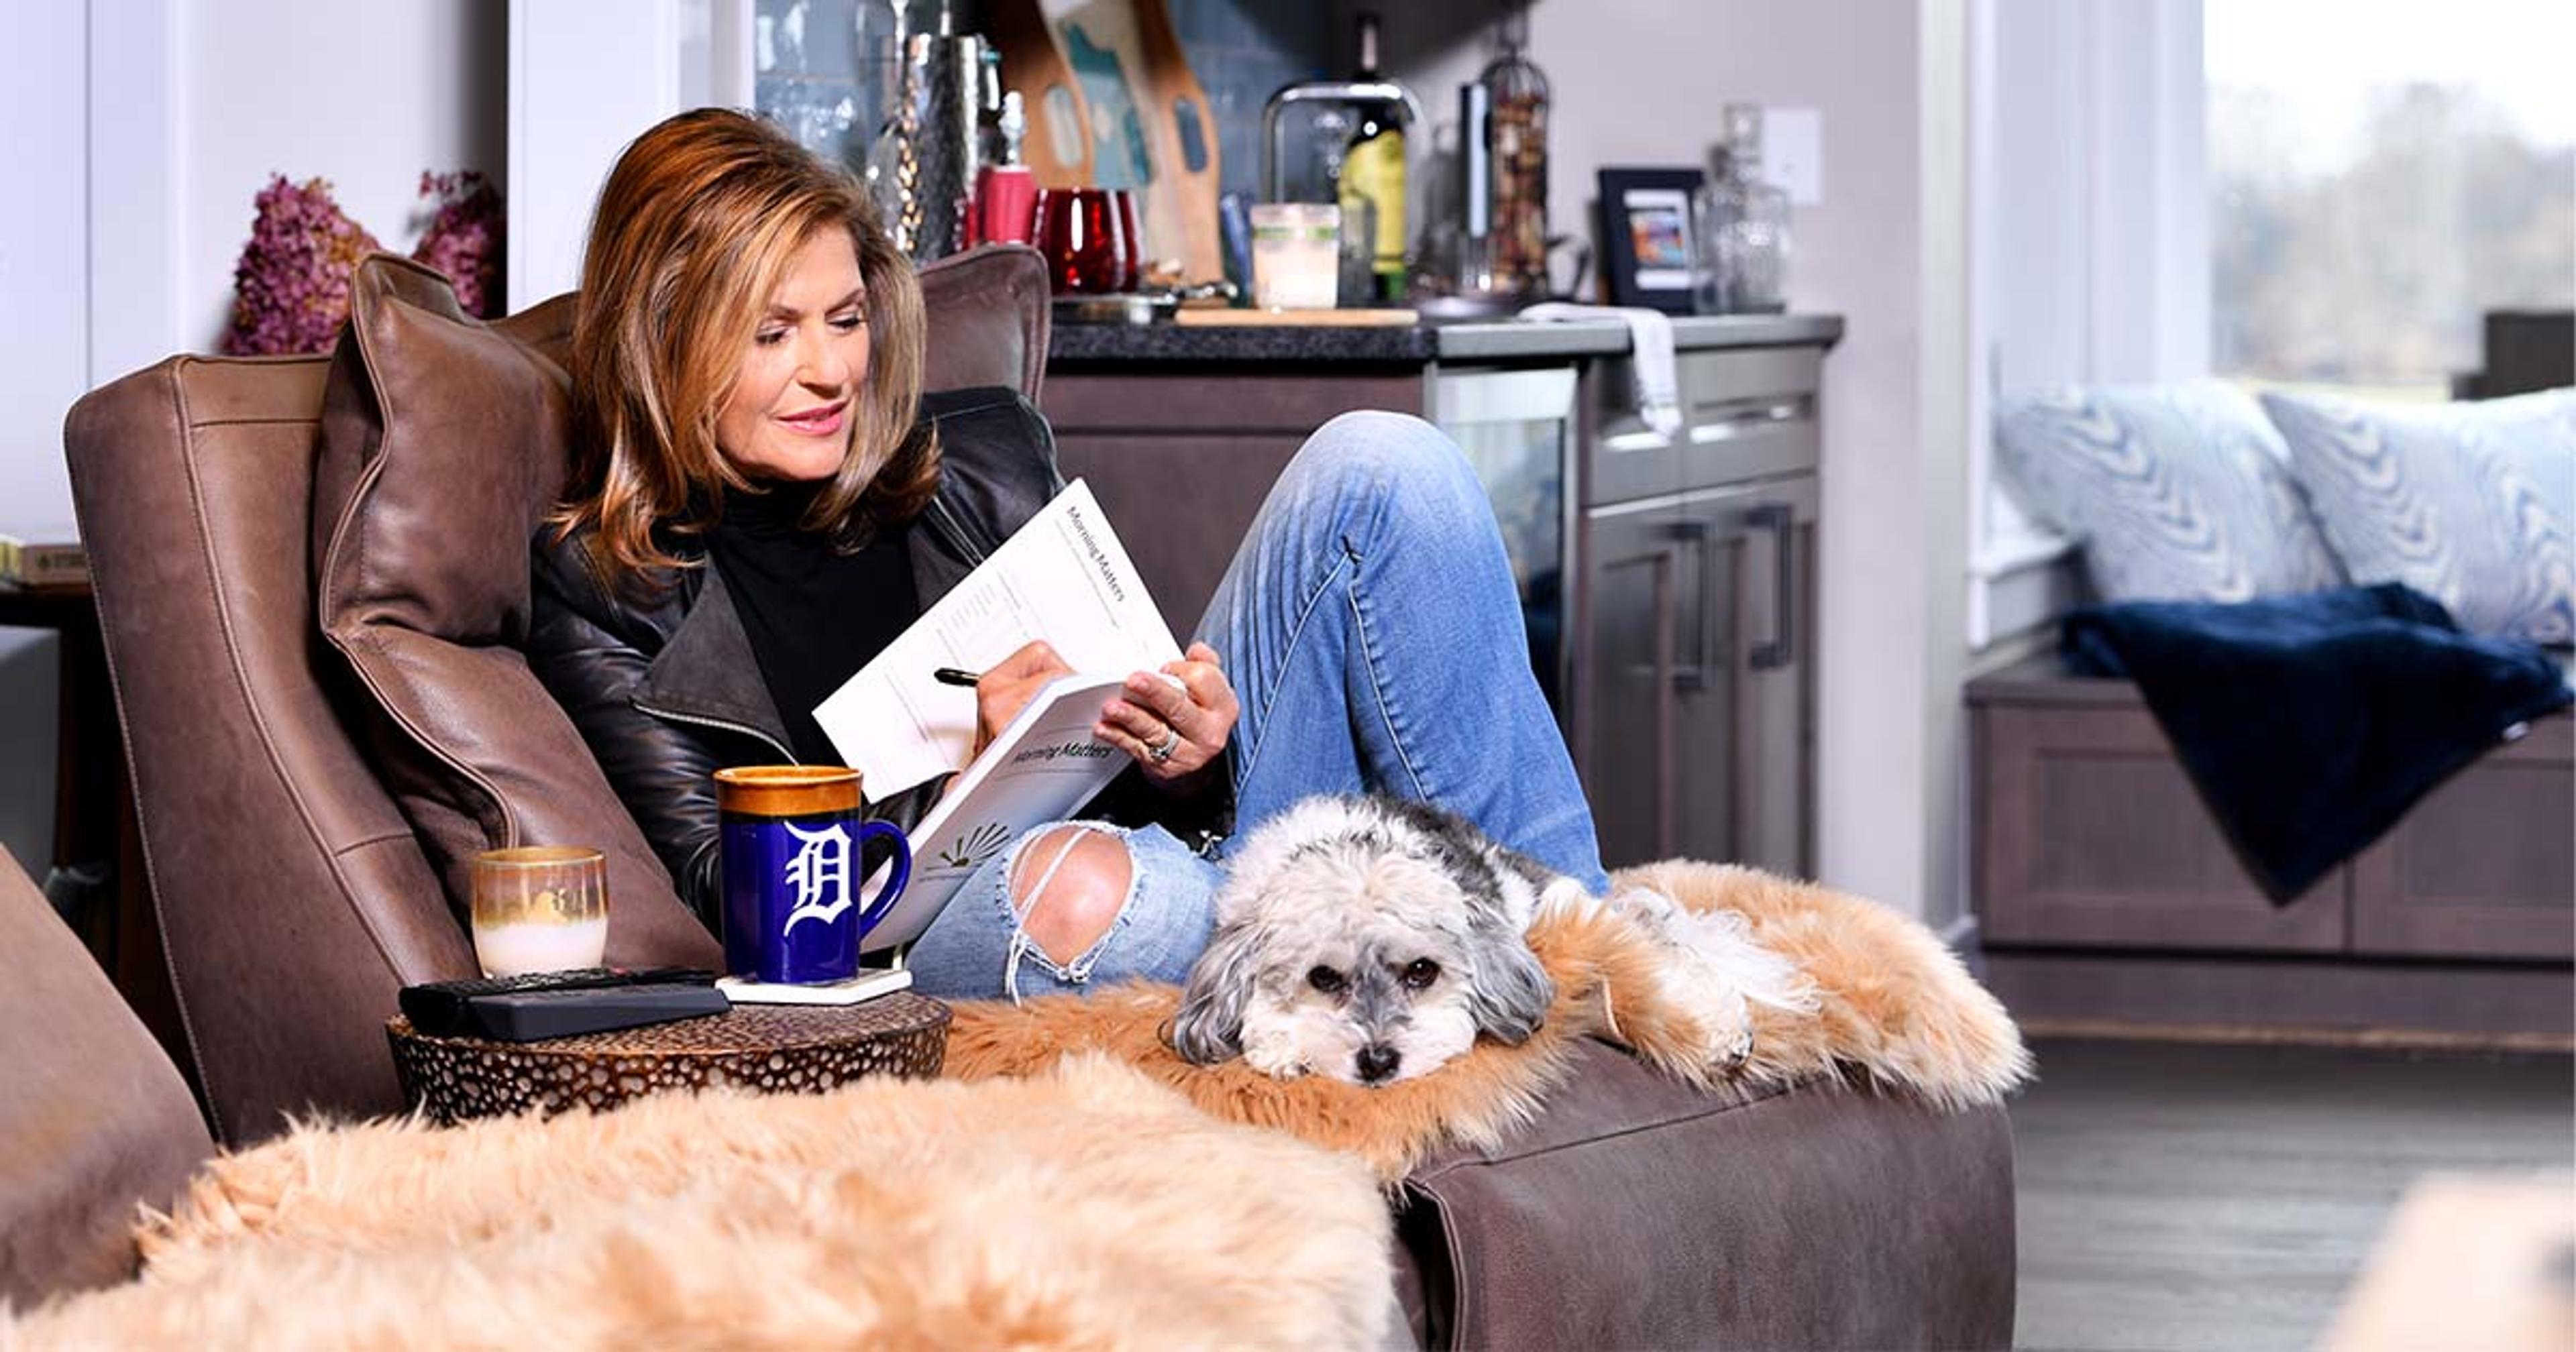 Woman journals on the couch with her dog.